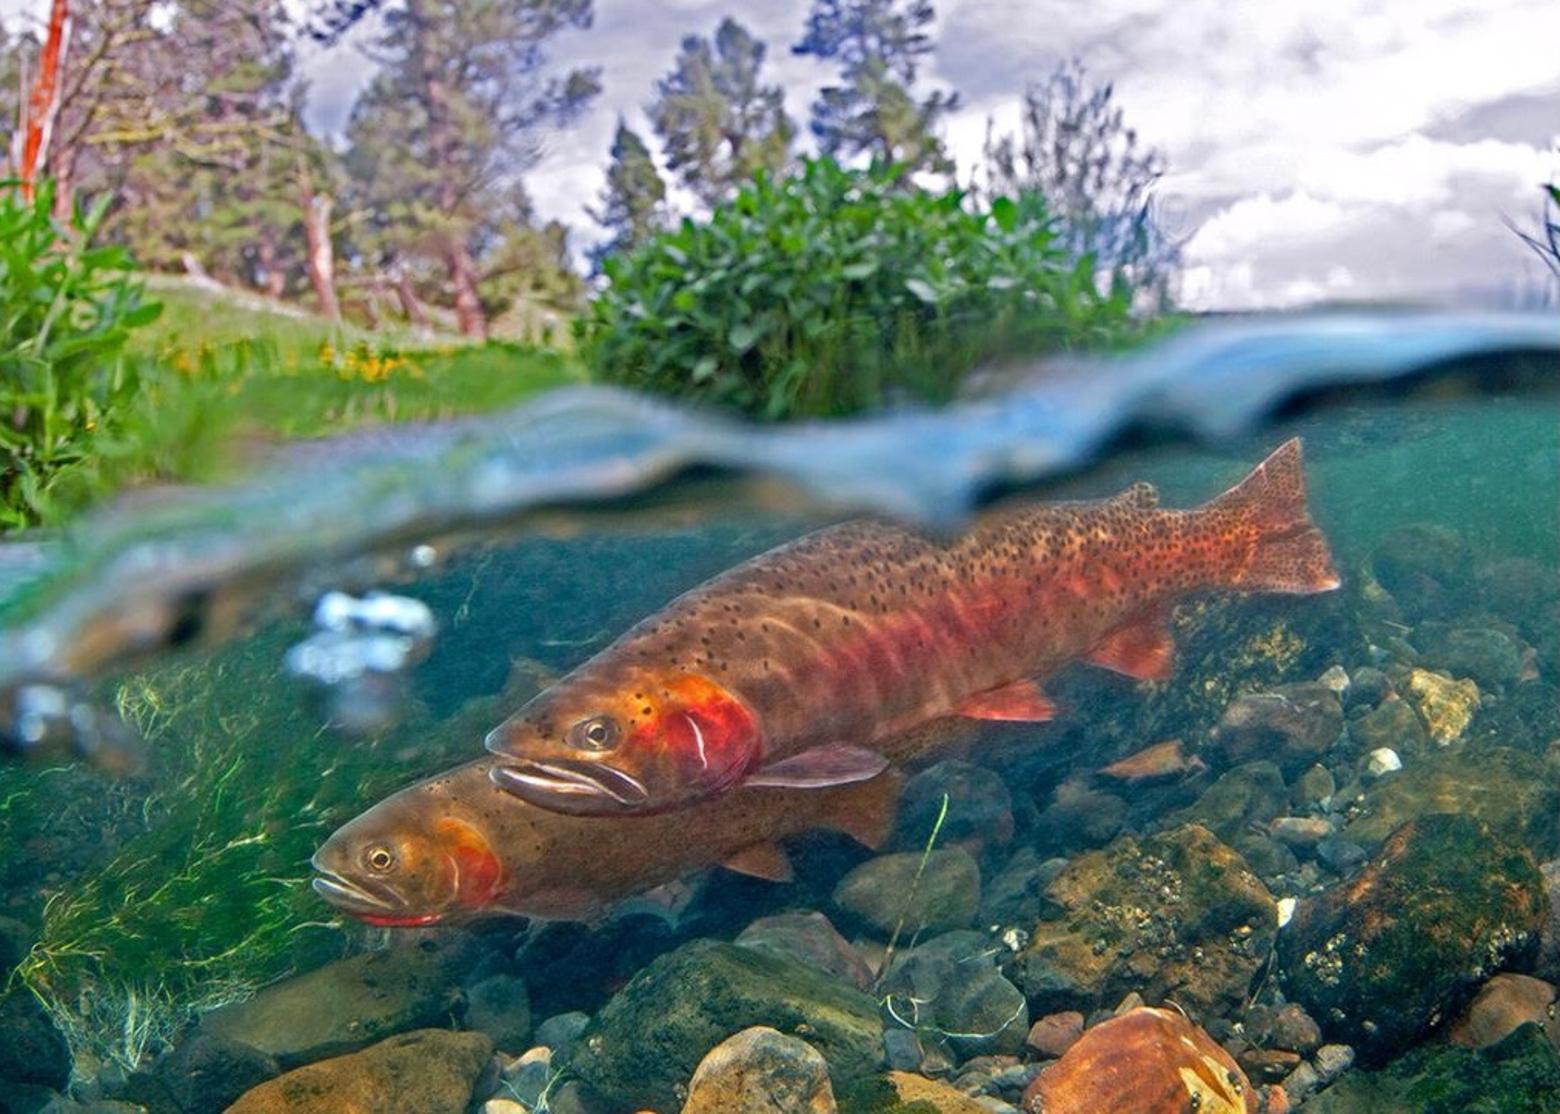 Yellowstone National Park is a fountainhead reservoir for Yellowstone cutthroat trout, famous in the world and a bellwether for the survival of native trout challenged by non-native transplants, habitat loss and rivers affected by climate change.  Photo courtesy Pat Clayton (fisheyeguyphotography.com)